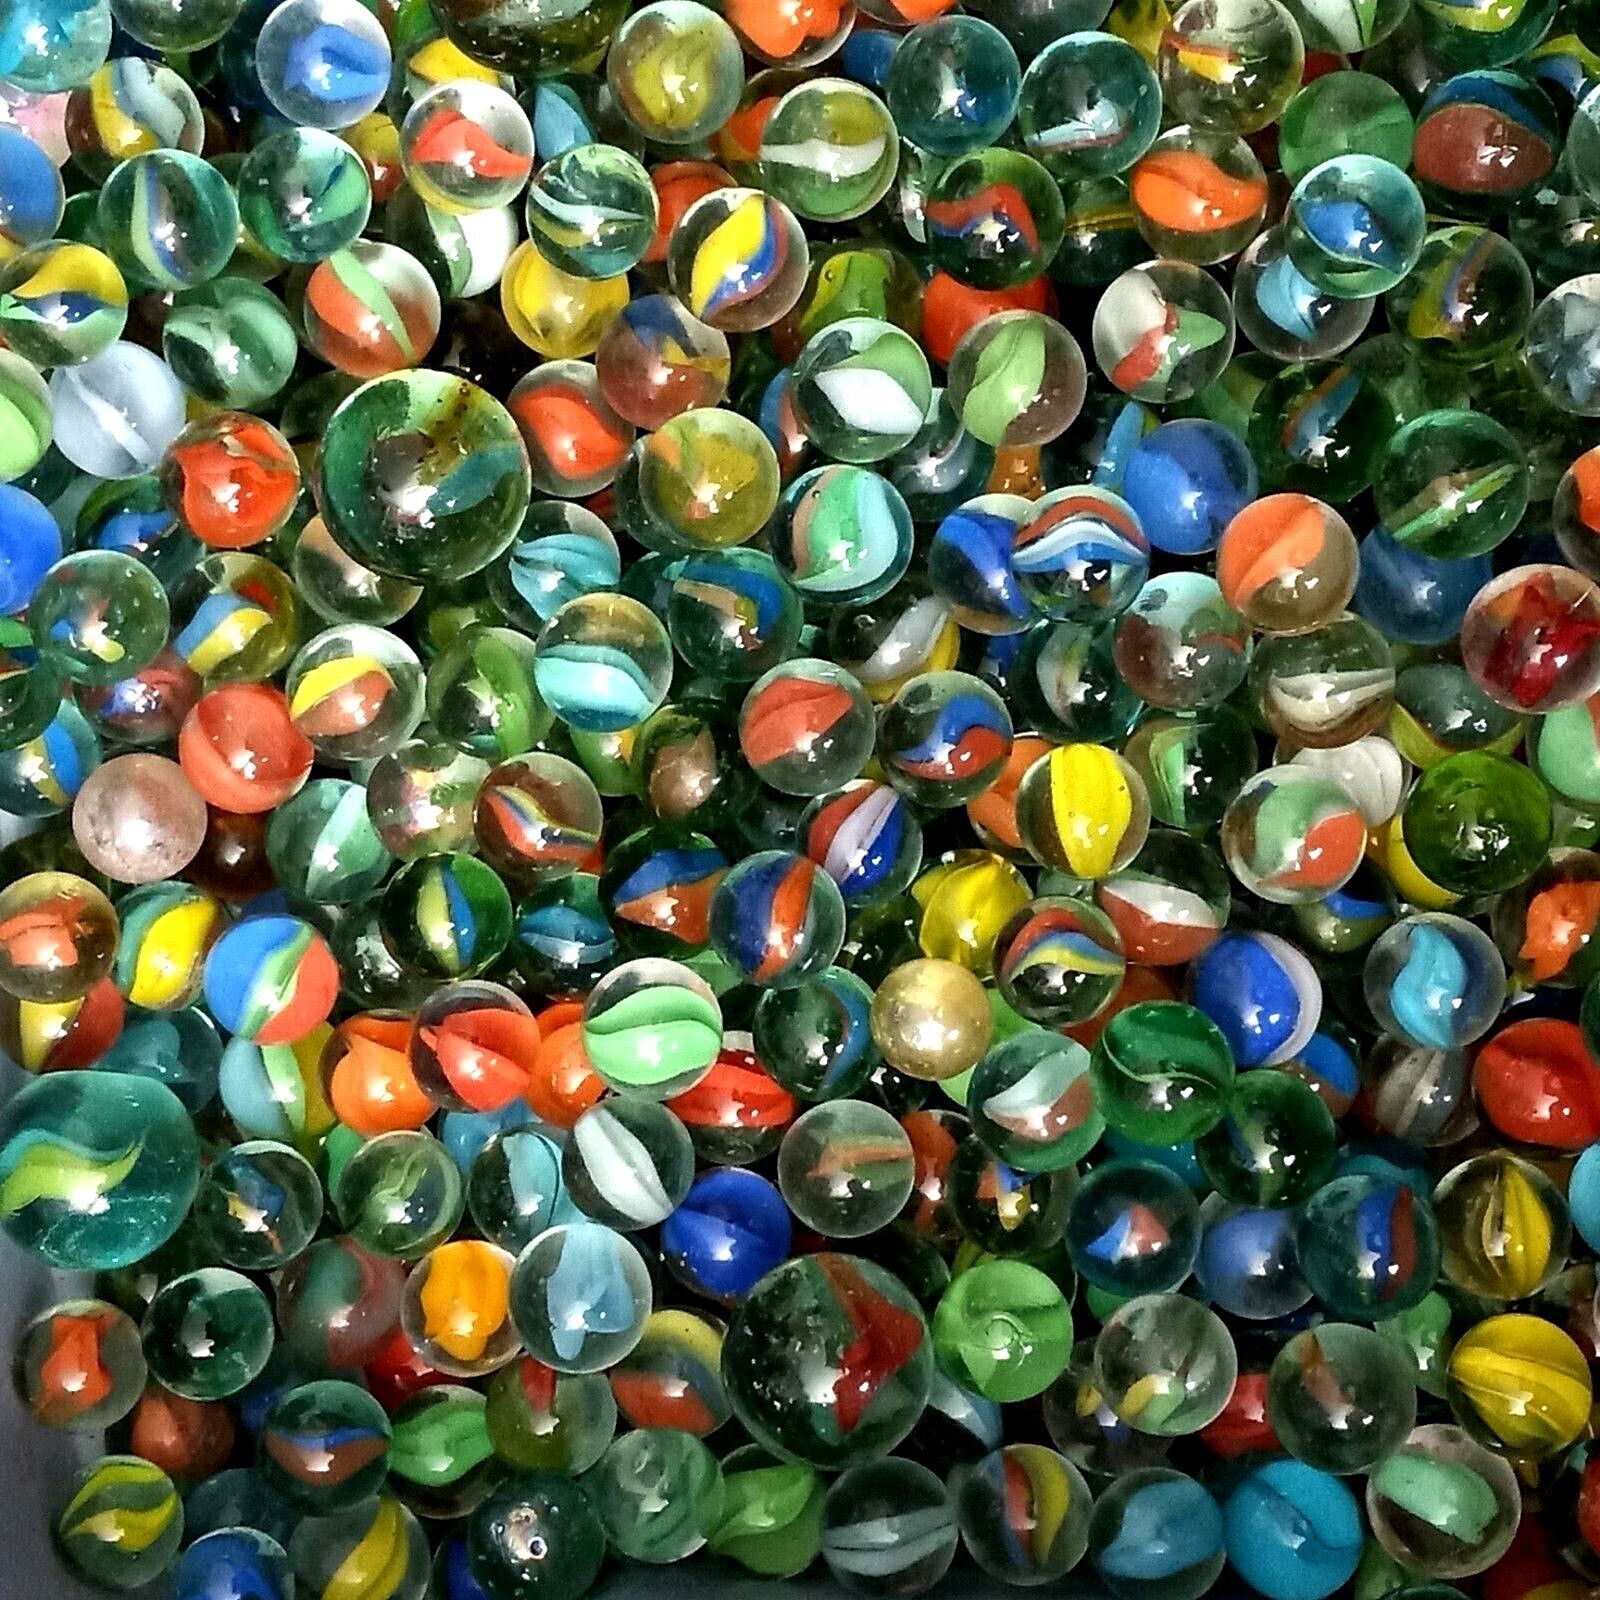 Vintage Glass Cat Eyes Marbles 200 Marbles Random Mix Lot 1930's And Up Vitro Agate